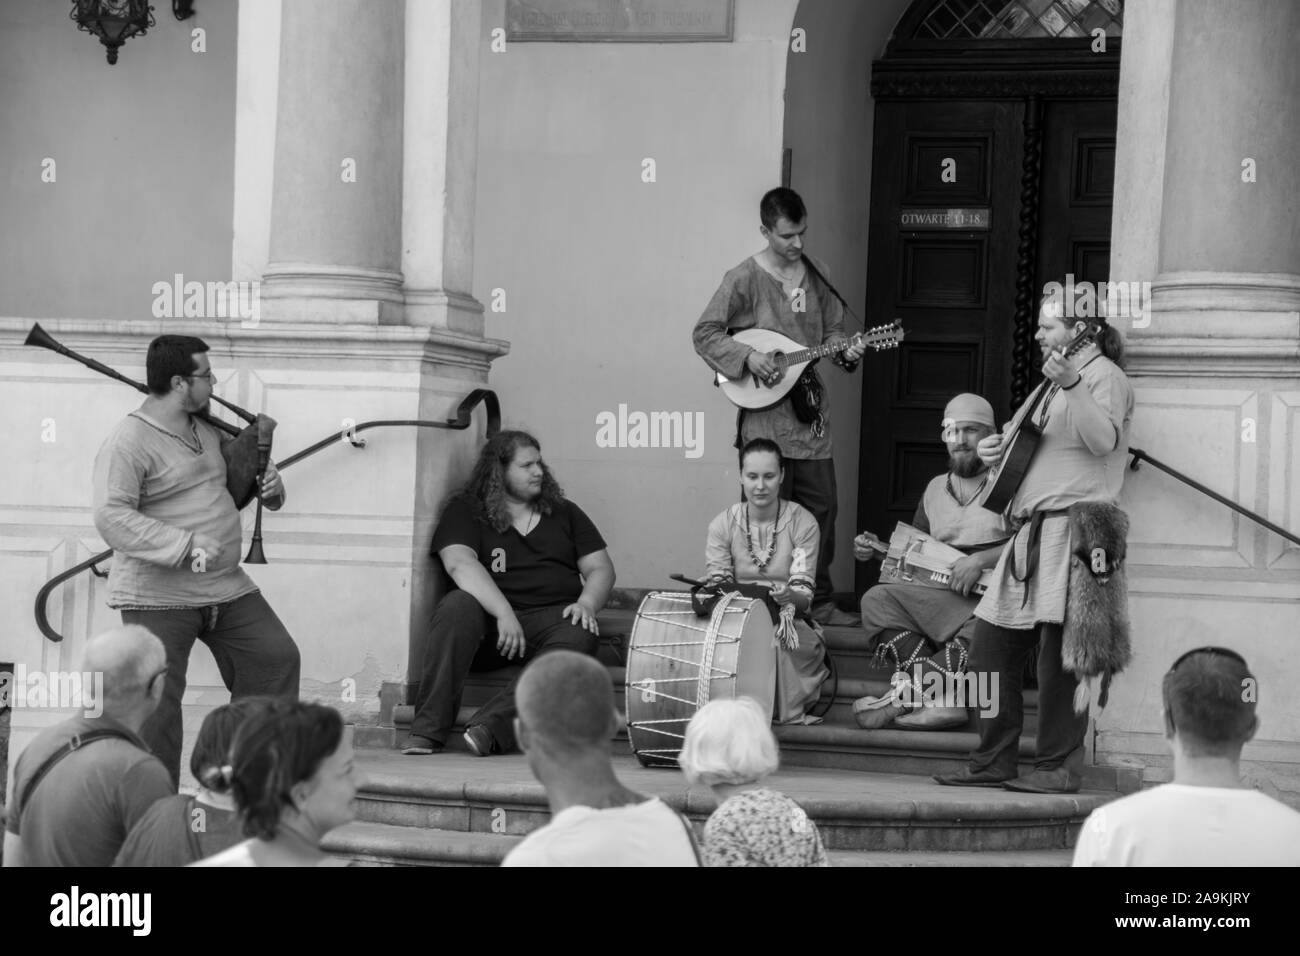 Street entertainers playing folk music in Old Village Square, Poznan, Poland Stock Photo